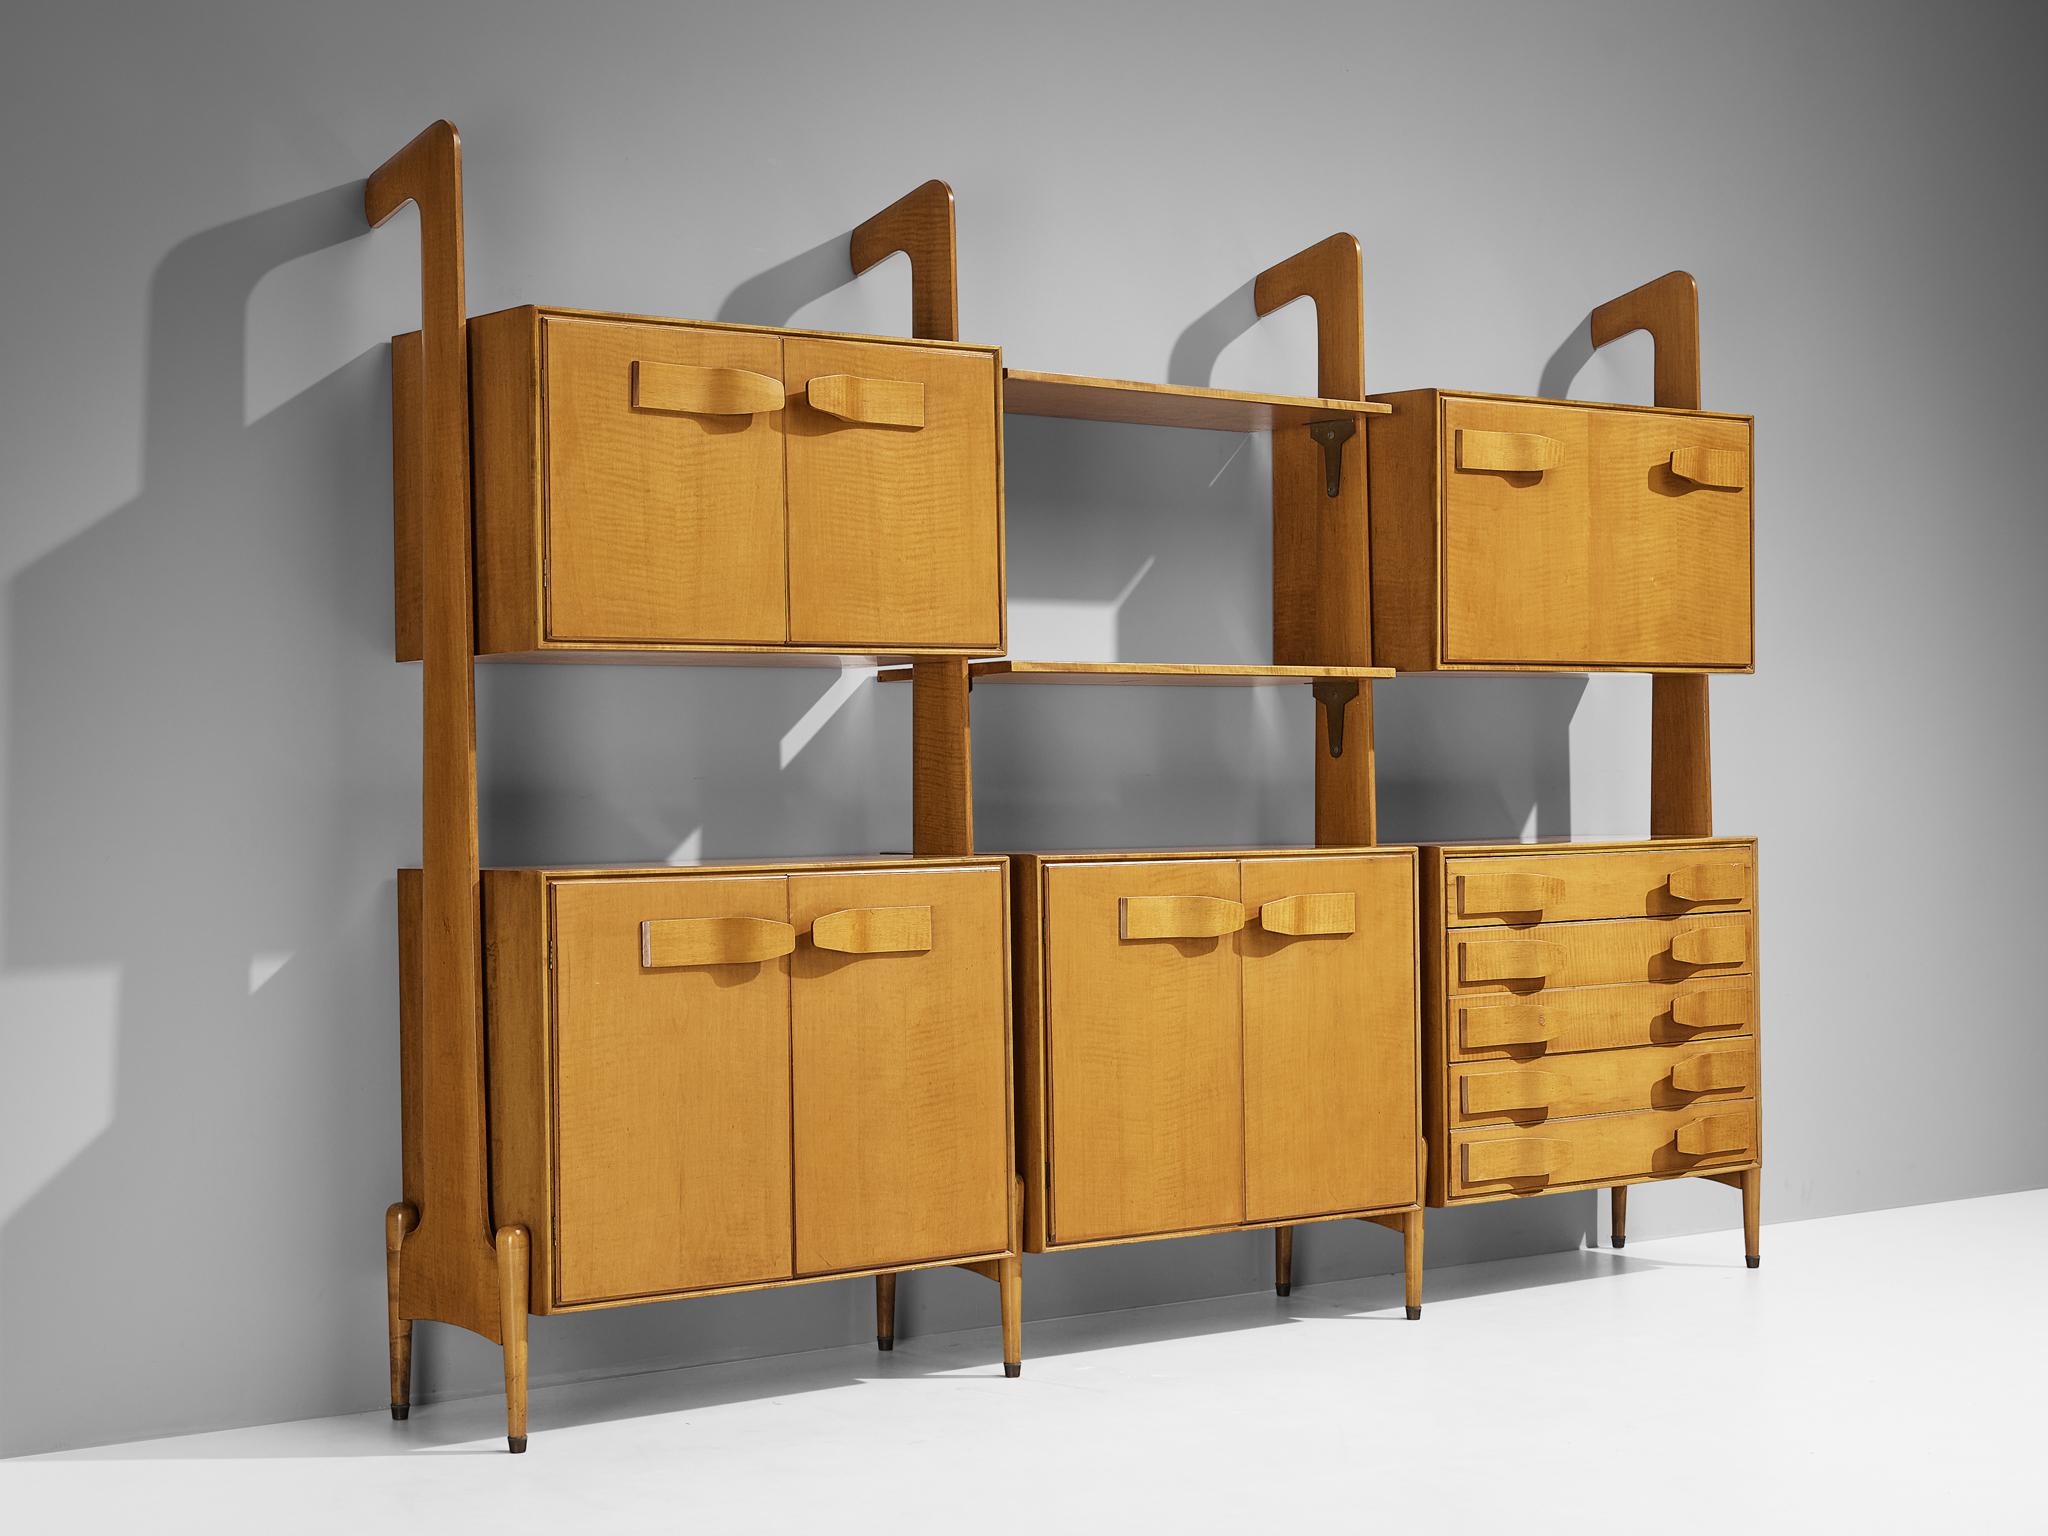 Wall unit, cherry, brass, Italy, 1960s

Hailing from a skilled artisan of Italy, this exceptional library unit excels in form, Material use, composition, and craftsmanship. The bookcase reflects the design principles of the midcentury era that rose